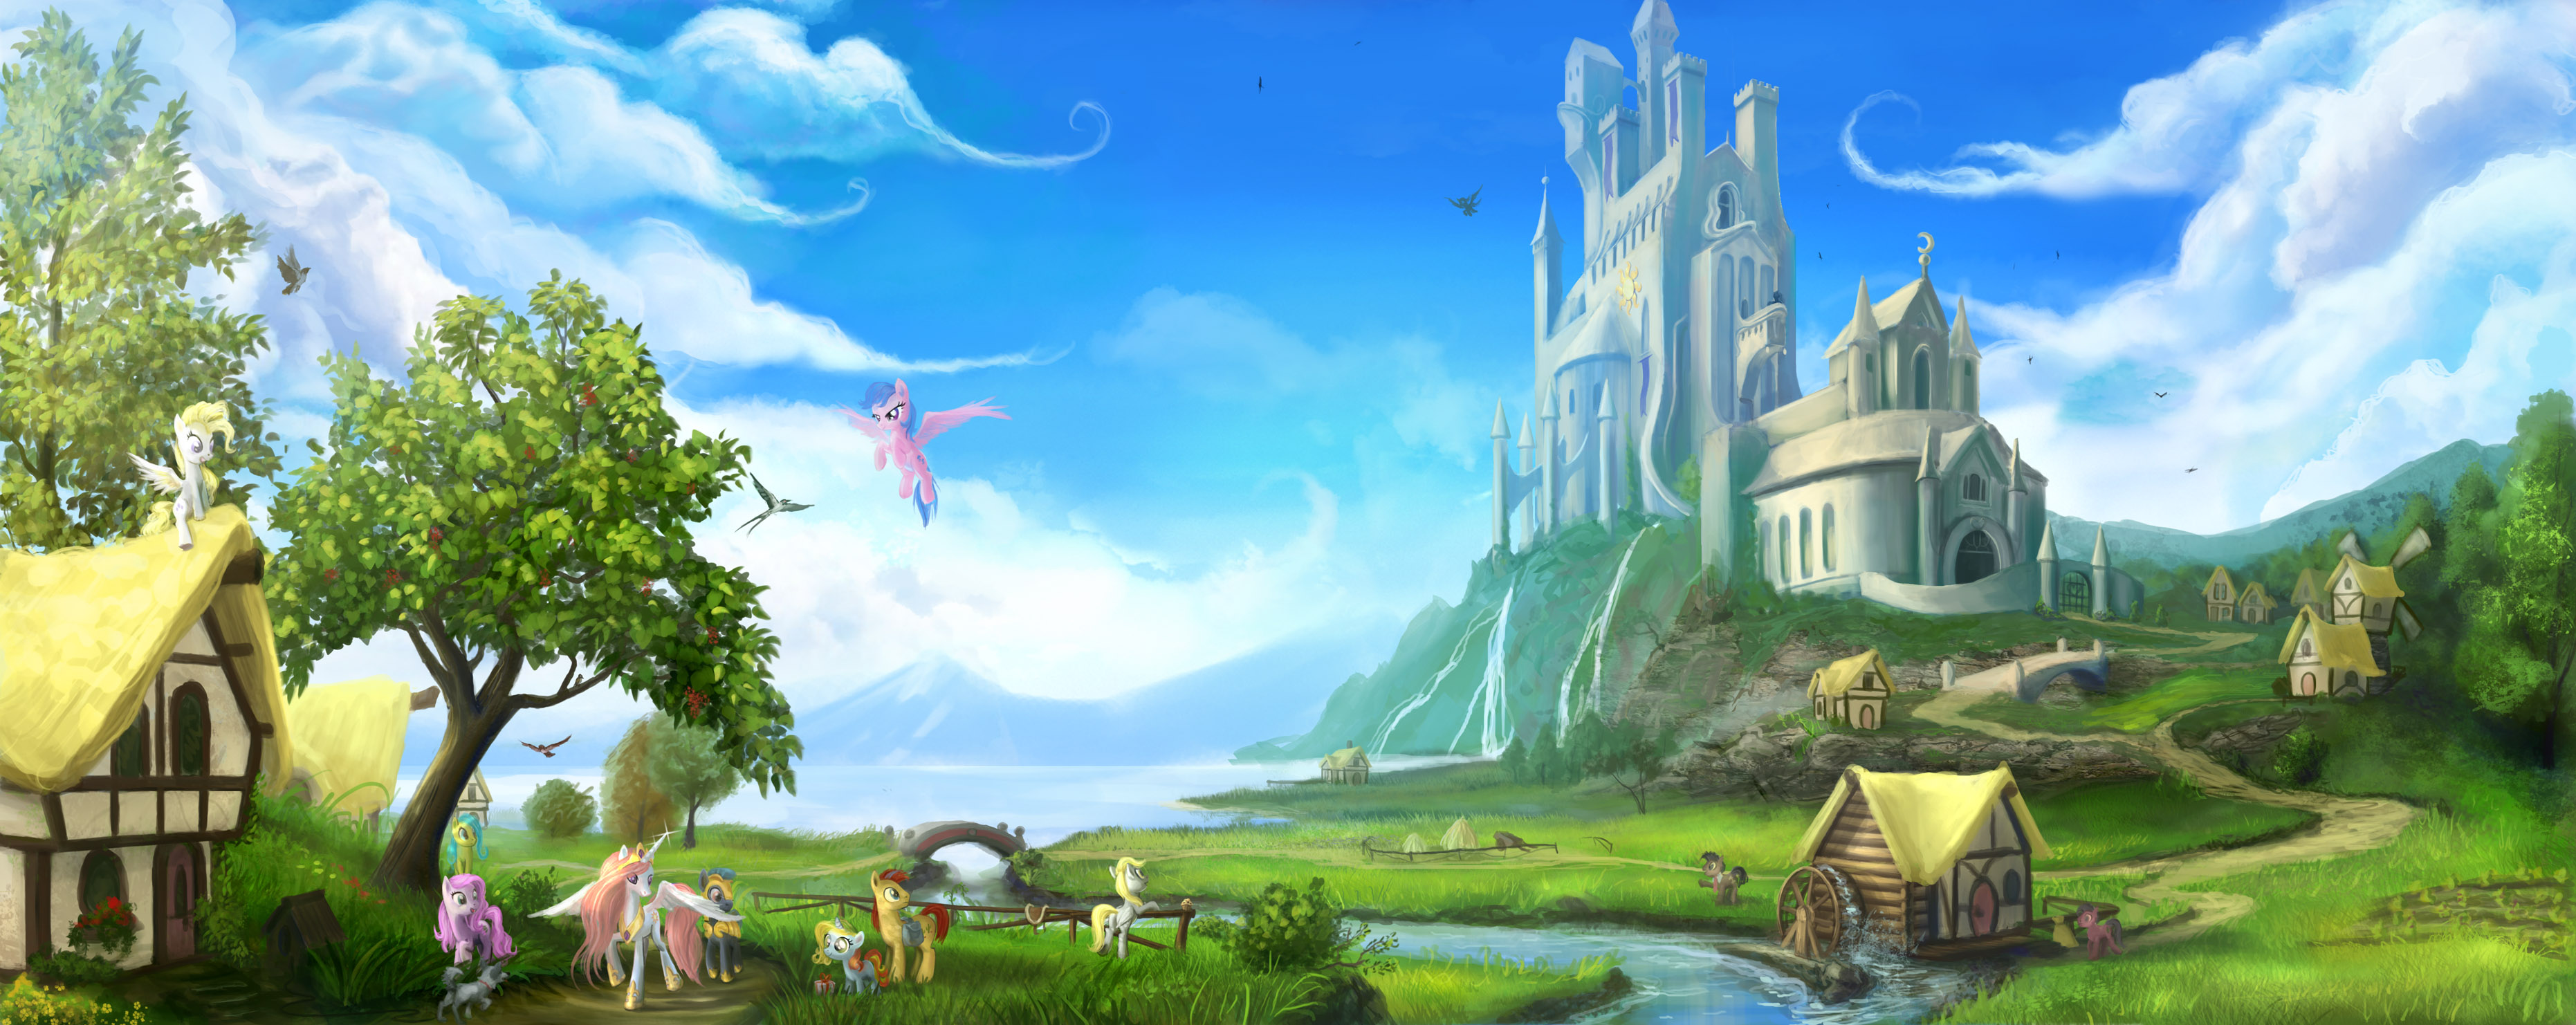 http://fc02.deviantart.net/fs71/f/2013/204/b/6/once_upon_a_time_in_equestria_by_devinian-d6er2uy.jpg